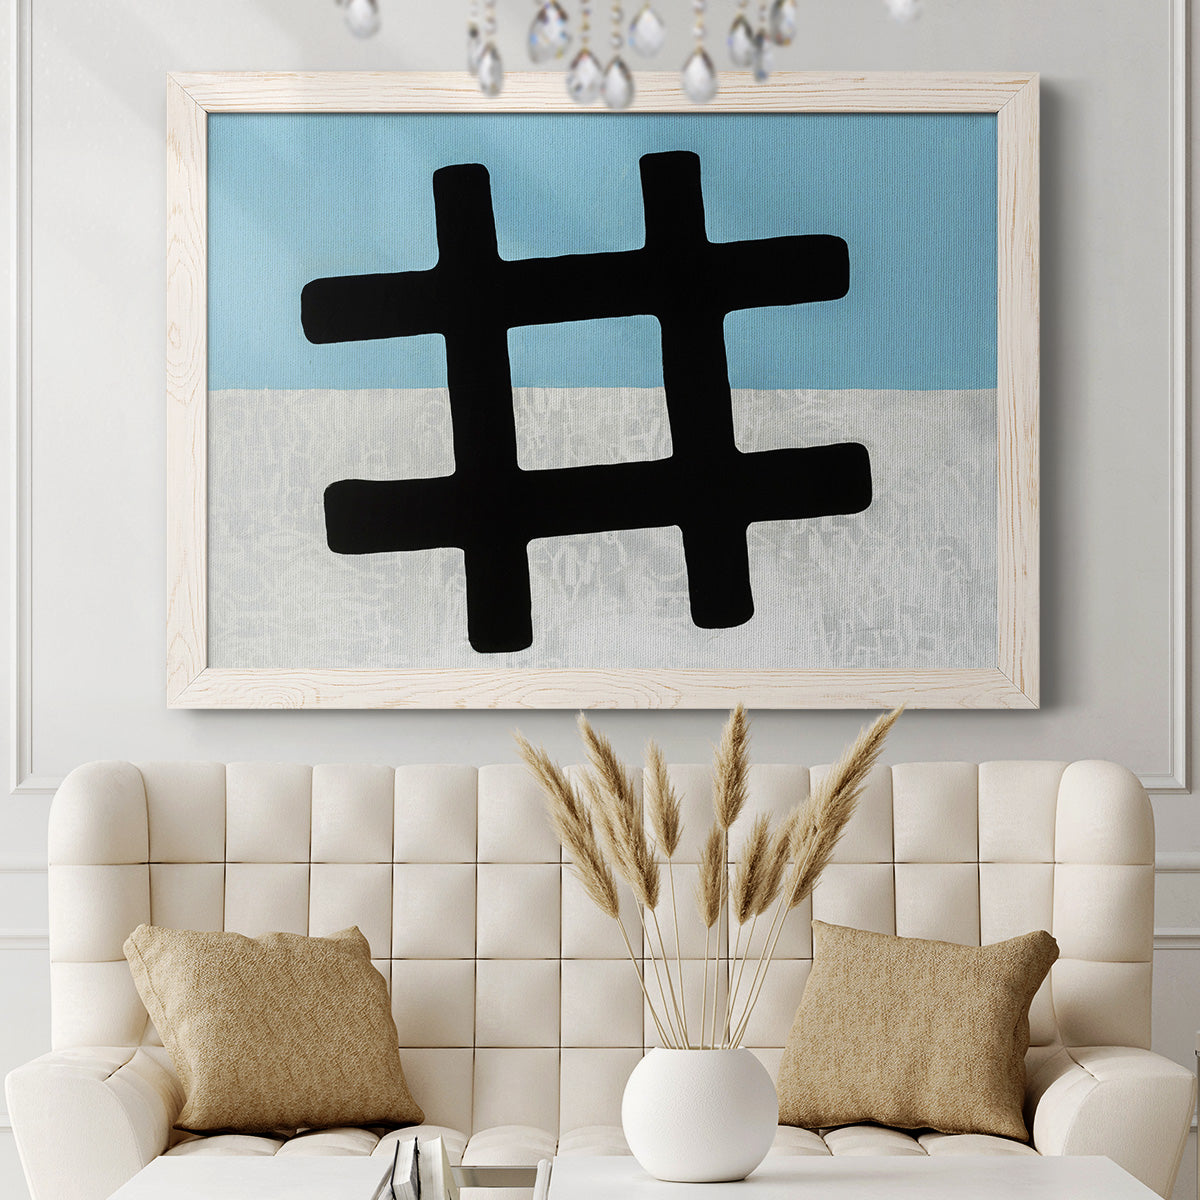 Hashtag-Premium Framed Canvas - Ready to Hang